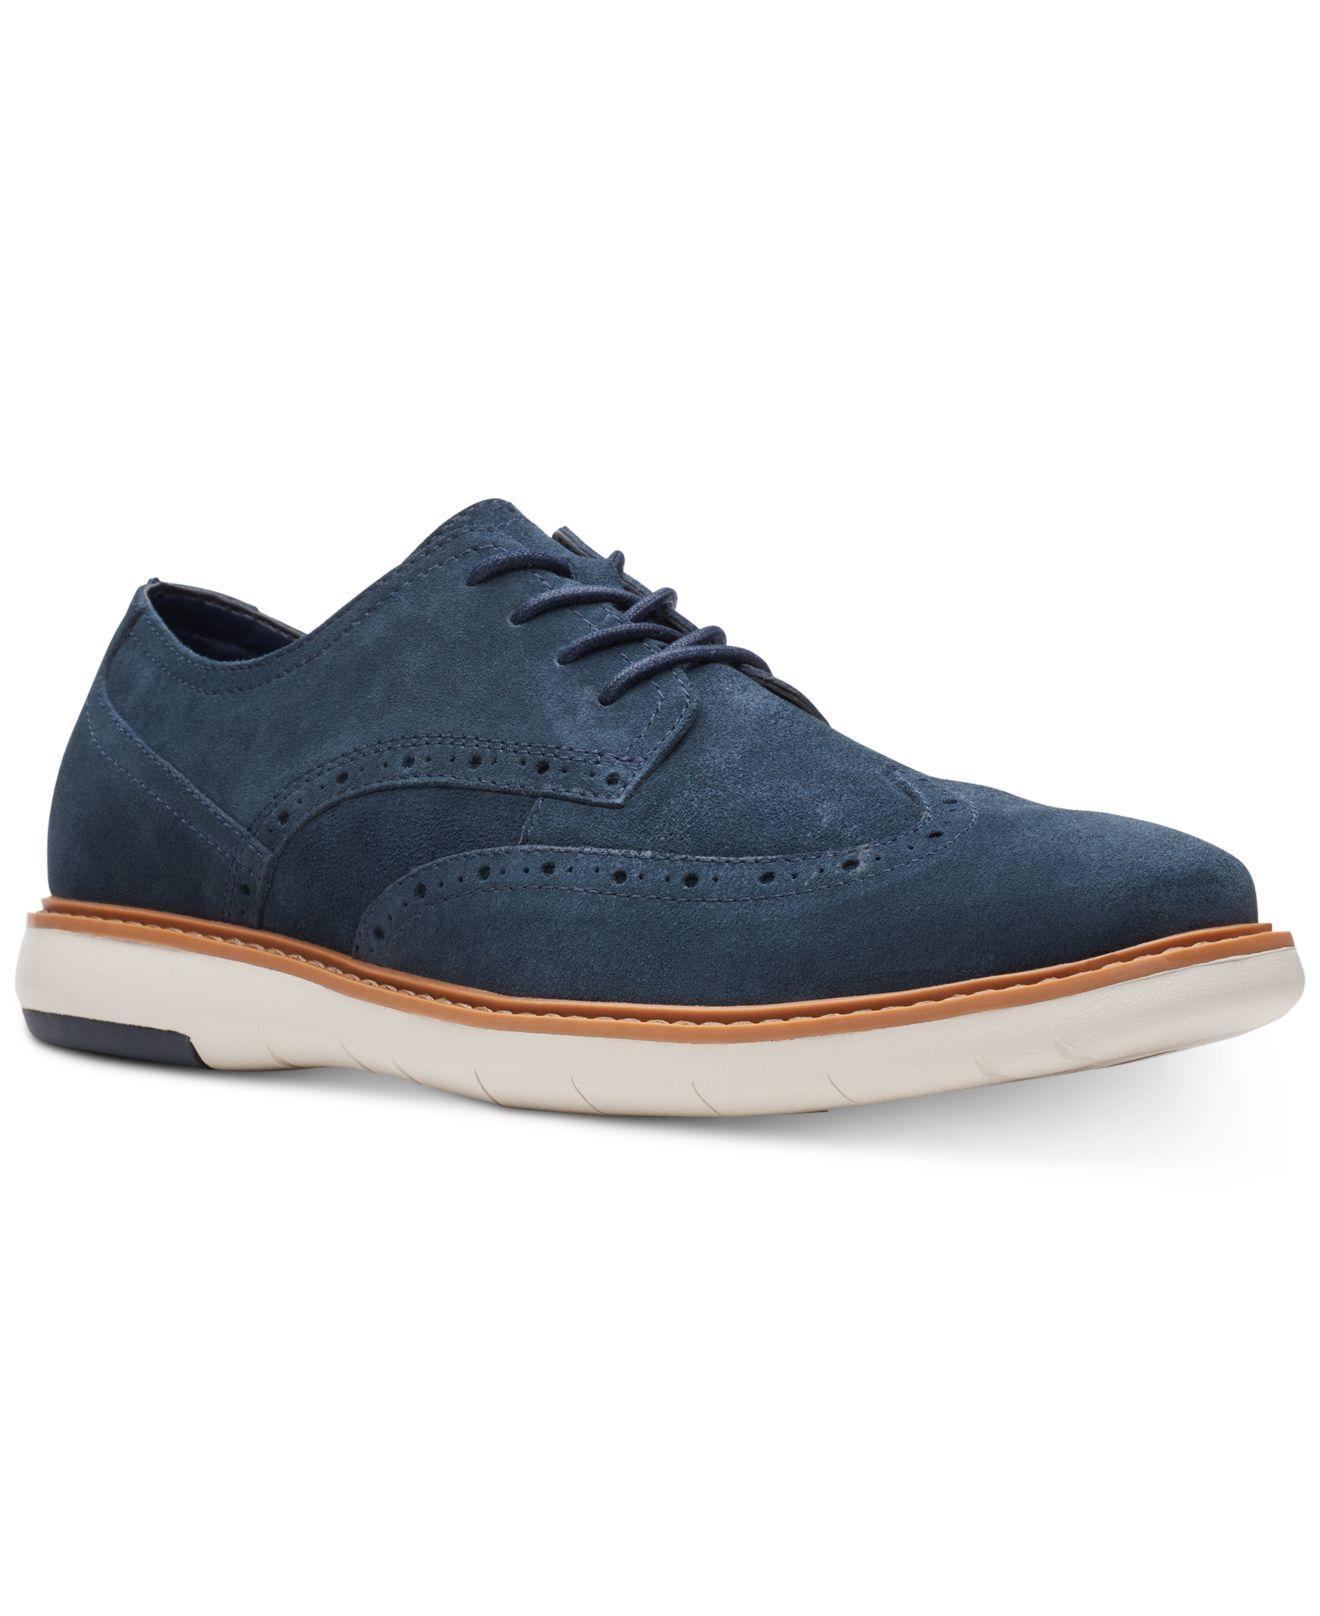 Clarks Draper Wingtip Navy Suede Casual Lace-up Shoes in Blue for Men ...